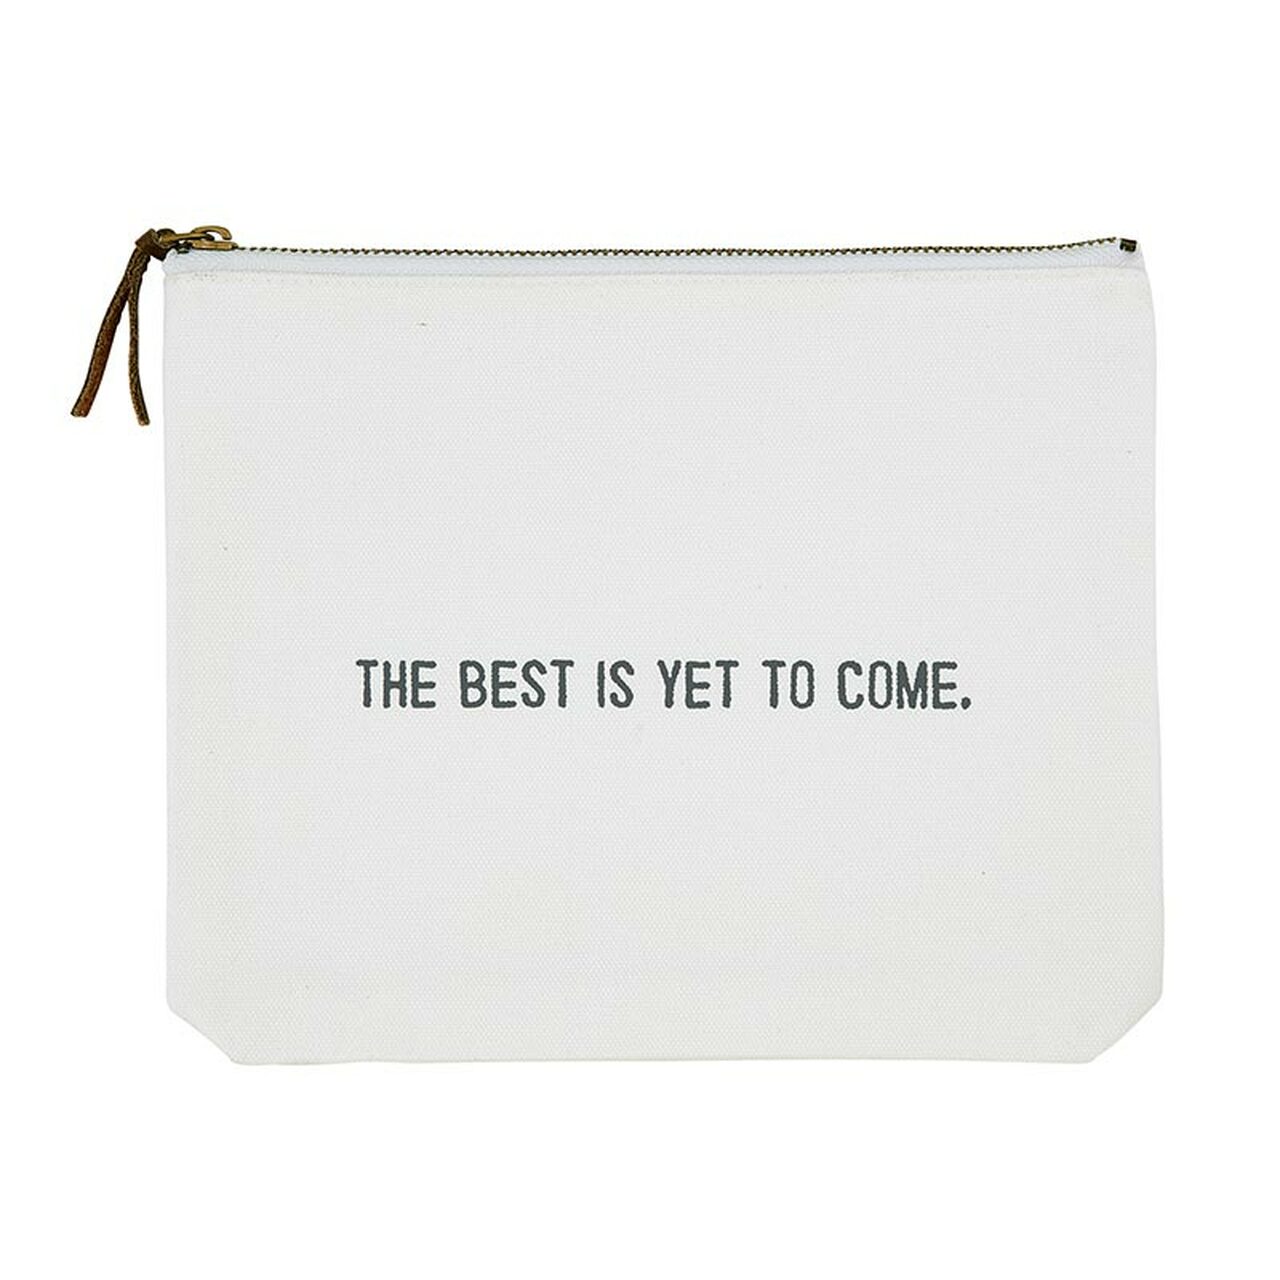 Santa Barbara The Best Is Yet To Come canvas zip pouch